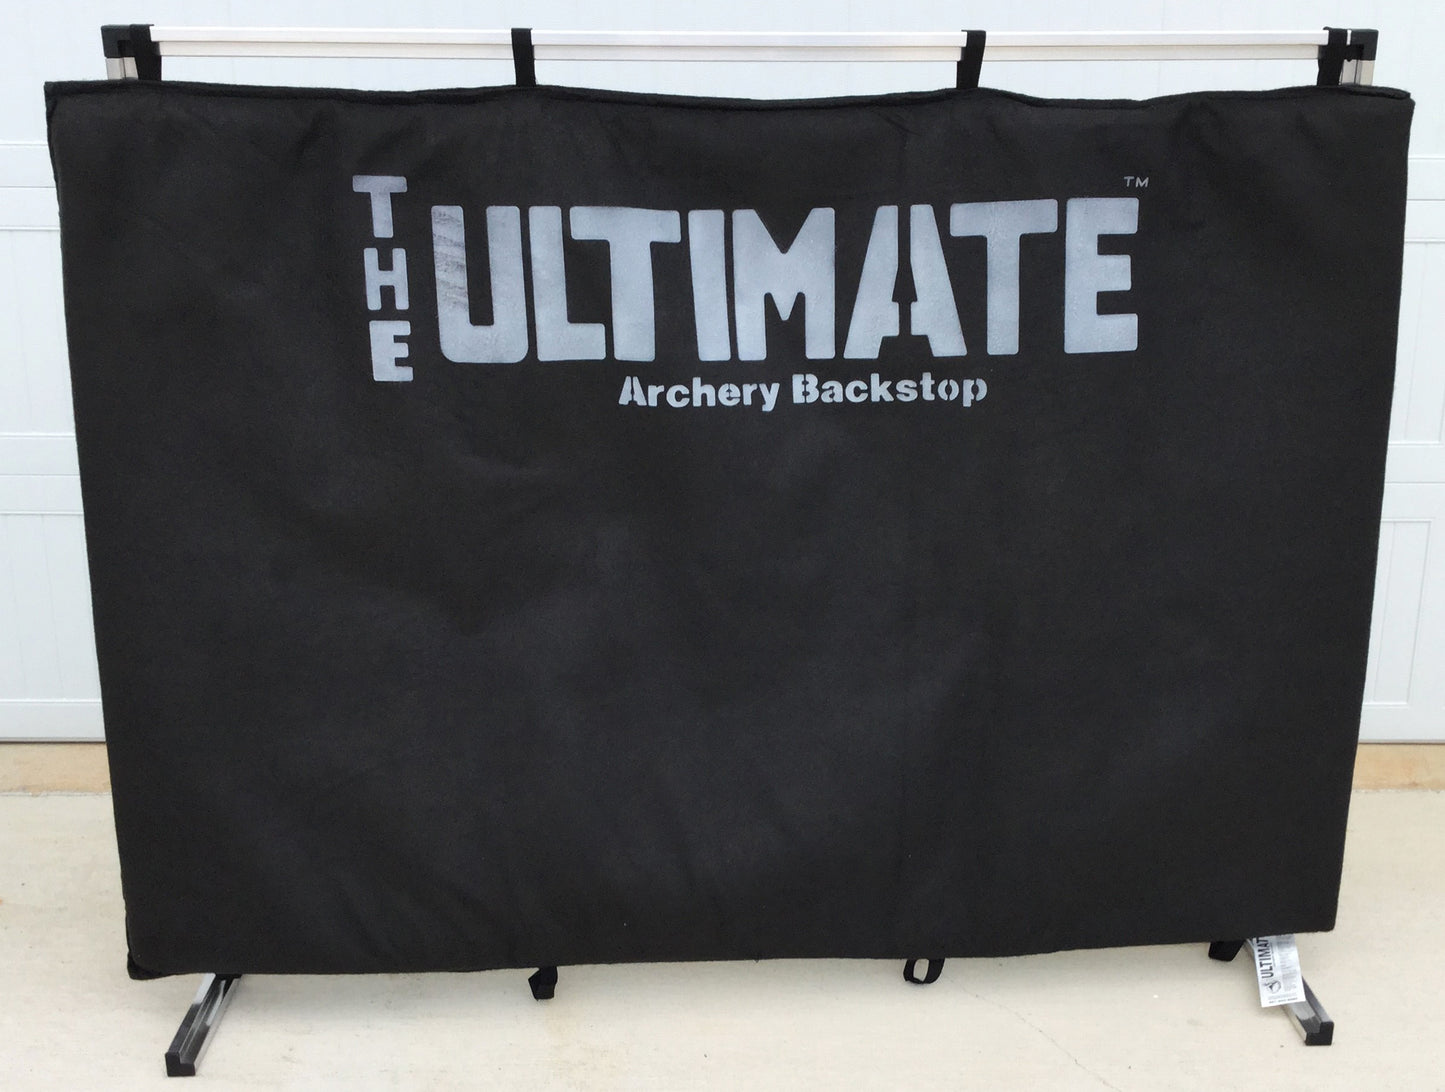 Aluminum Stand for the 4' x 6' Ultimate Archery Target Backstop